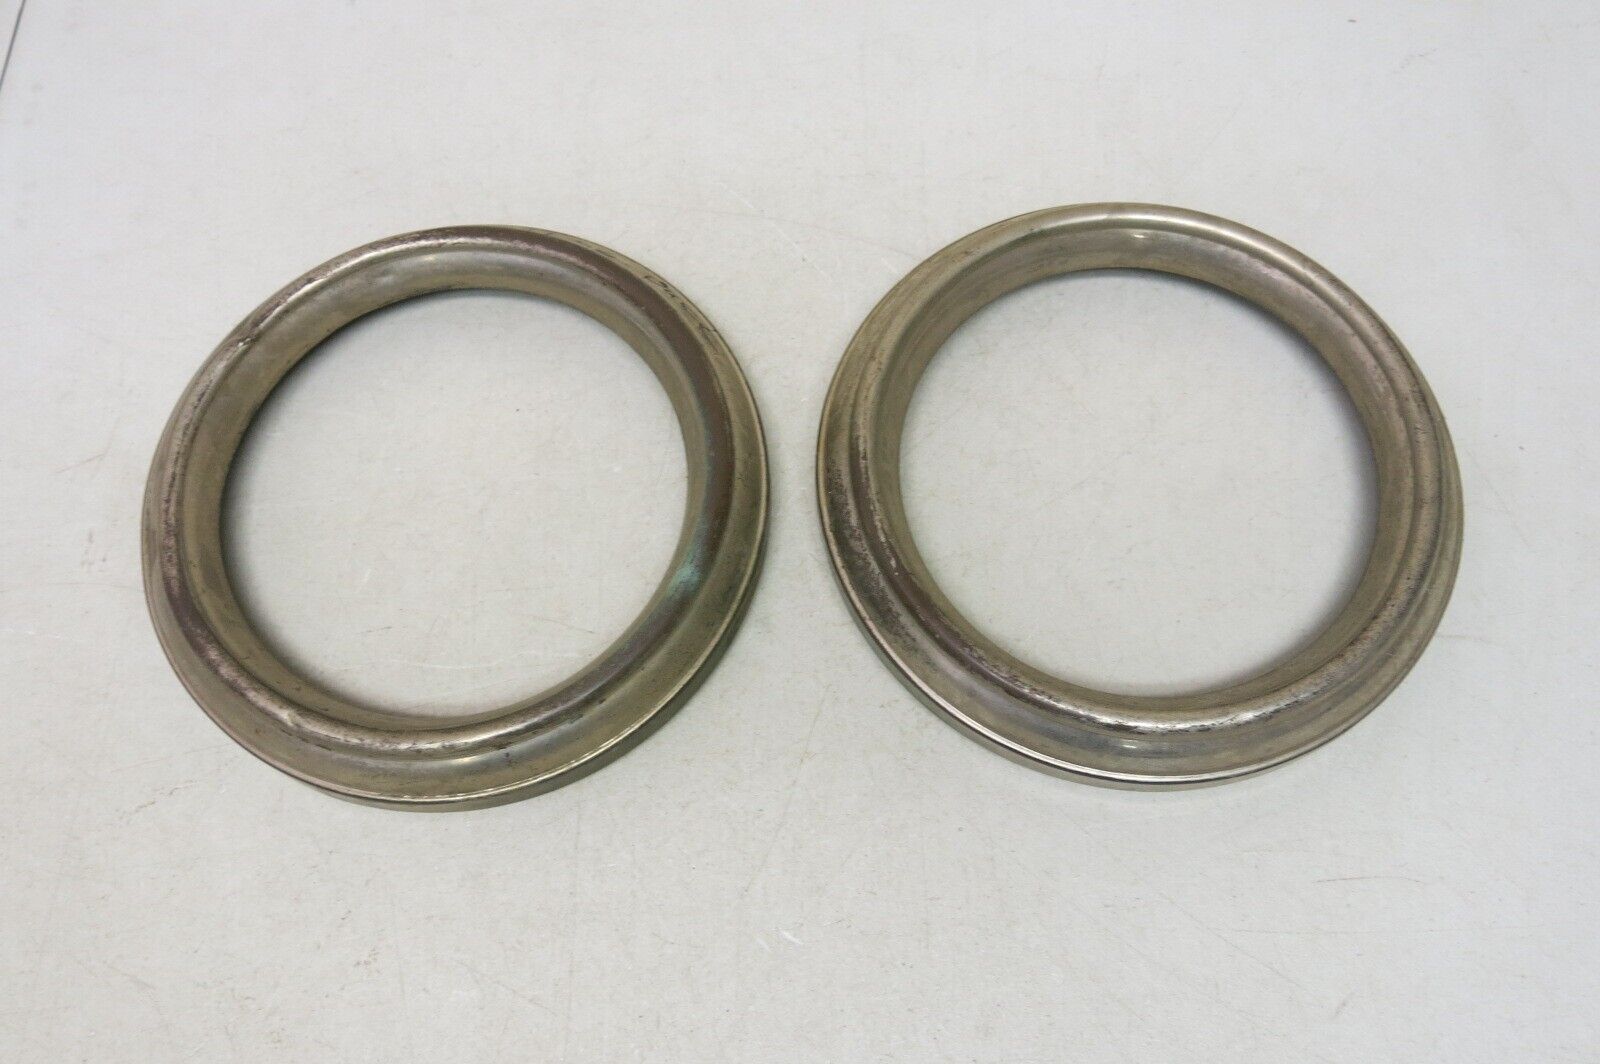 Vintage Headlight Rings Pair for 1922 Buick